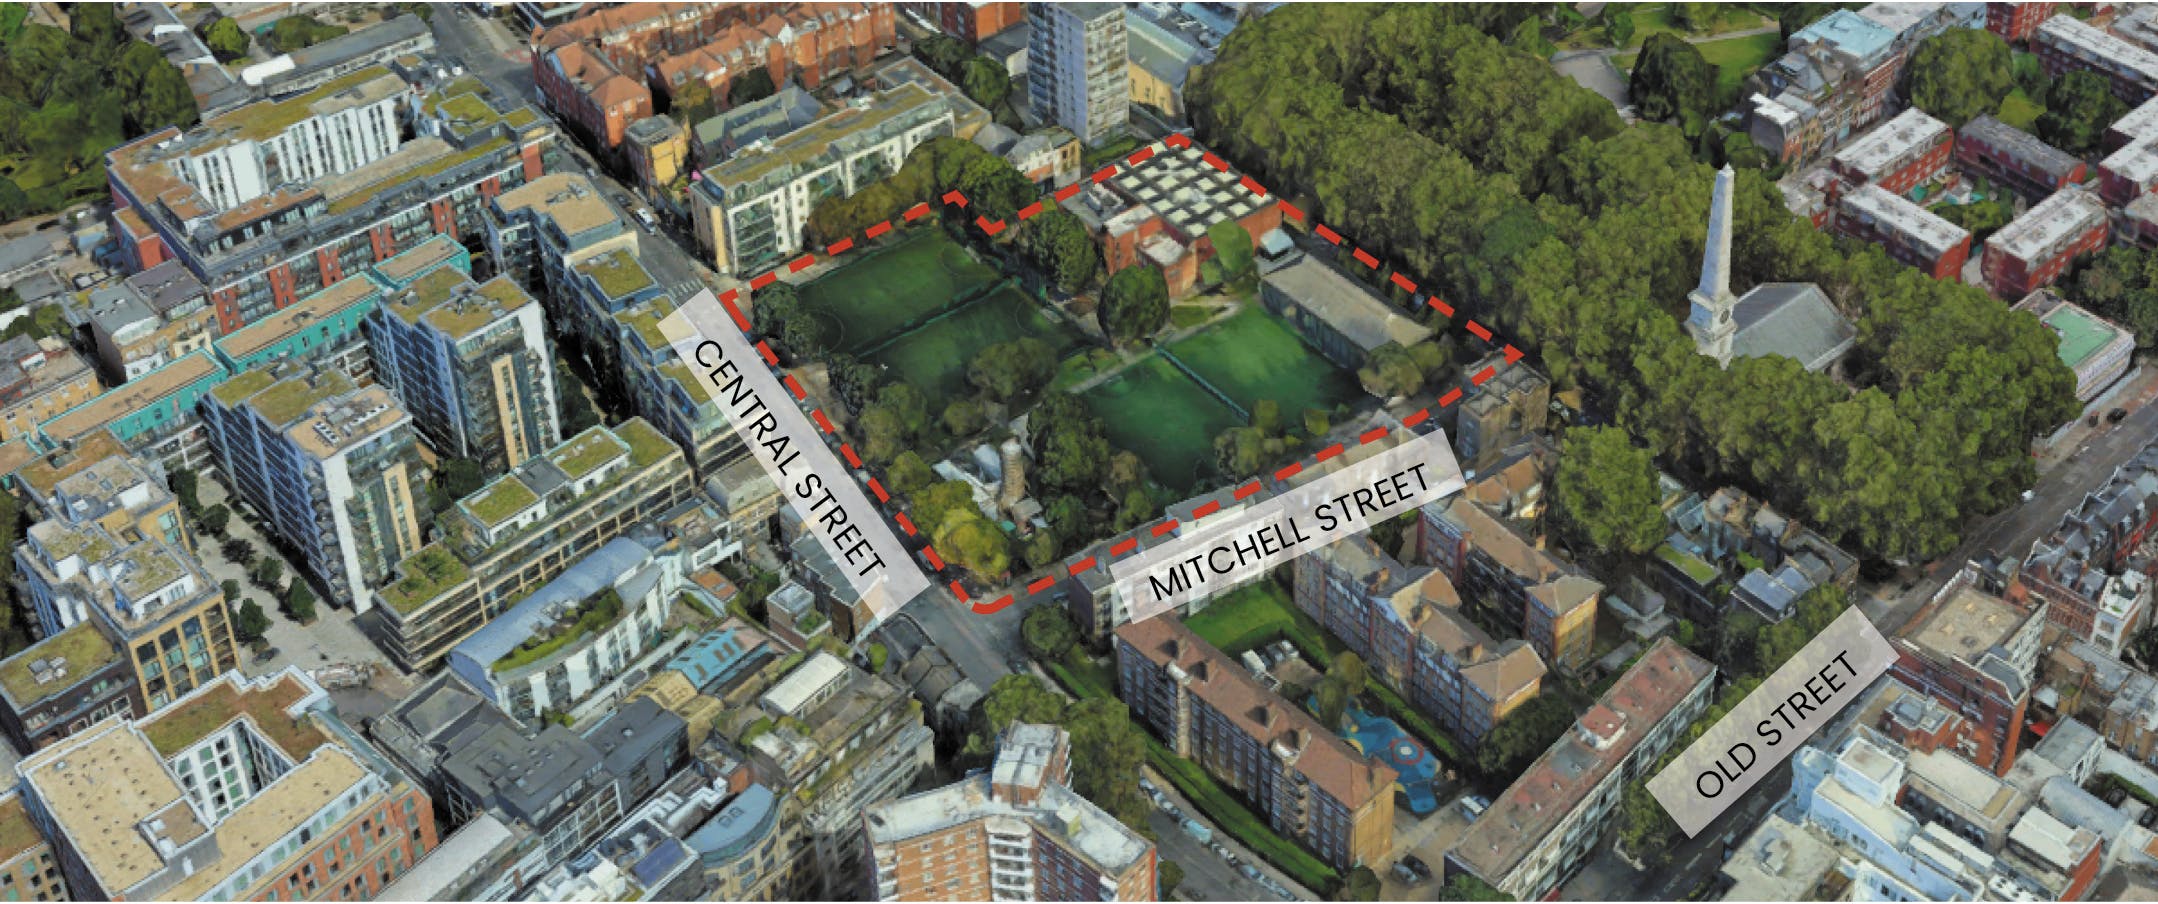 A photo of the Finsbury Leisure Centre site showing Mitchell Street, Central Street and Old Street